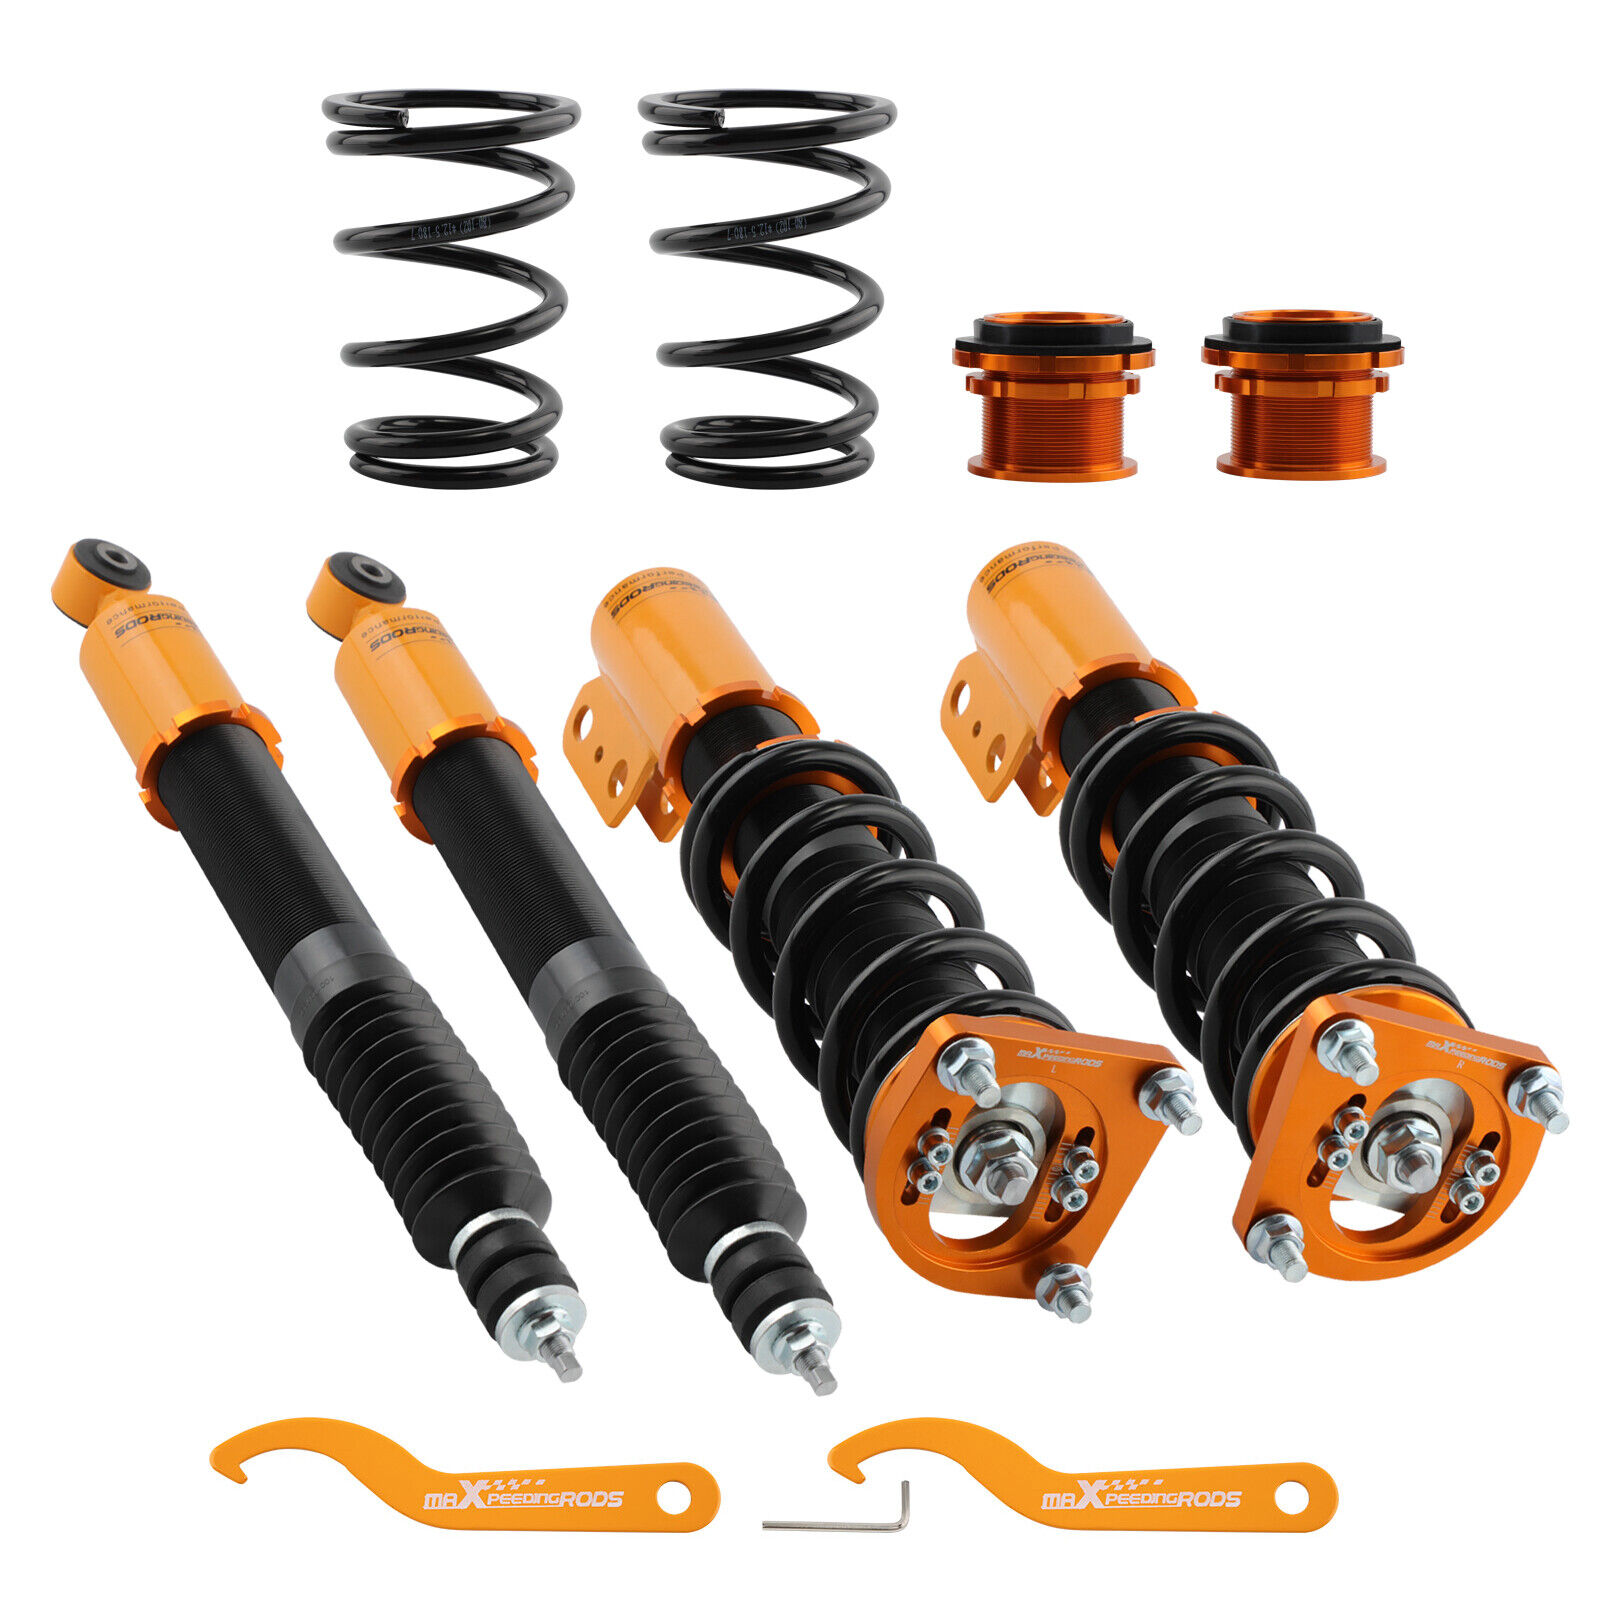 MaXpeedingrods Adjustable Coilovers Lowering Kits for Ford Mustang 4th 94-04